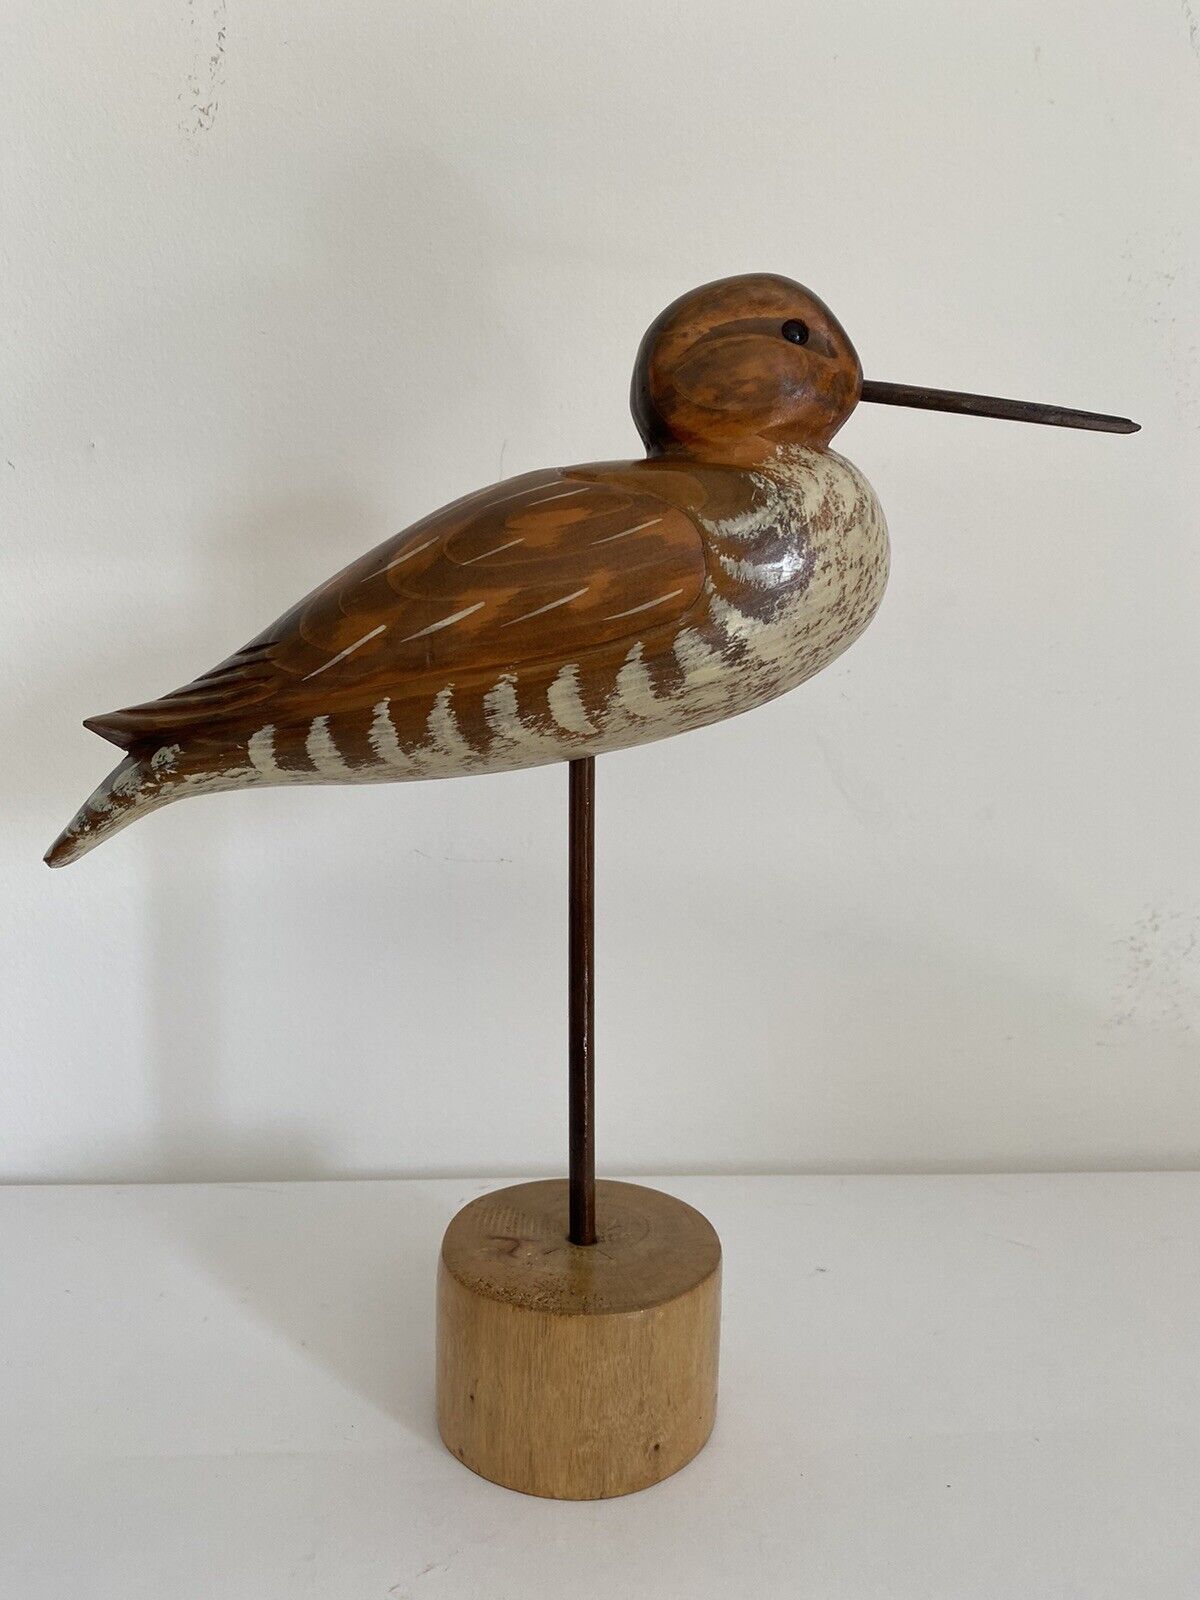 Andy Anderson Handmade Detailed Wood Sandpiper 13.5” X 14” X 4” Decoy Painted